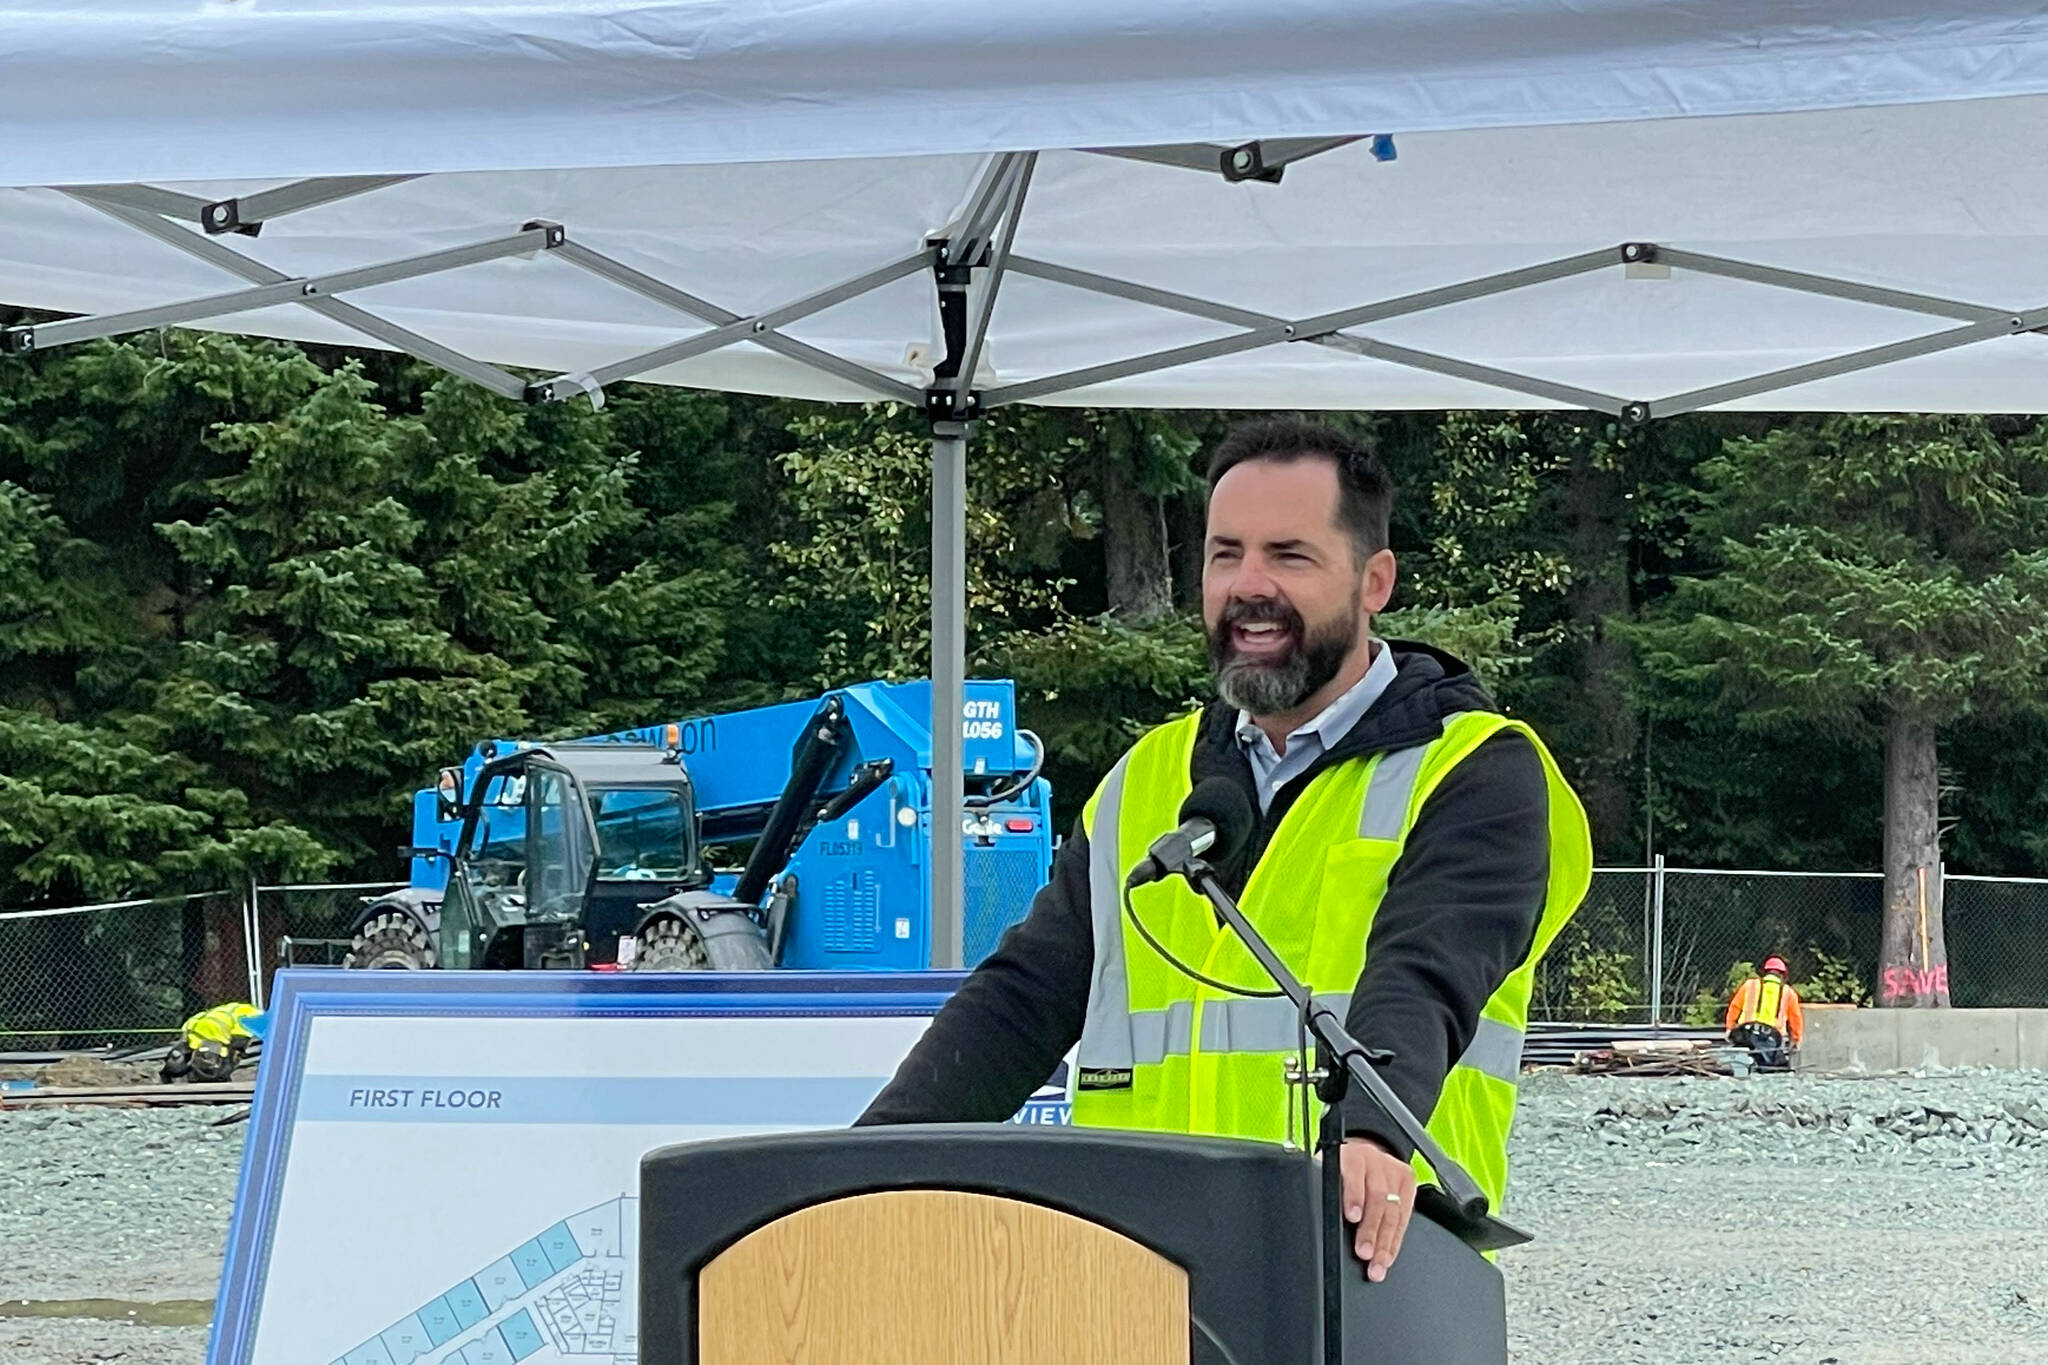 Matt Parks, president of Torrey Pines Development, speaks during the groundbreaking of the Riverview Senior Living community, which his company is helping the City and Borough of Juneau to develop, on Sept. 8, 2021. (Michael S. Lockett / Juneau Empire)